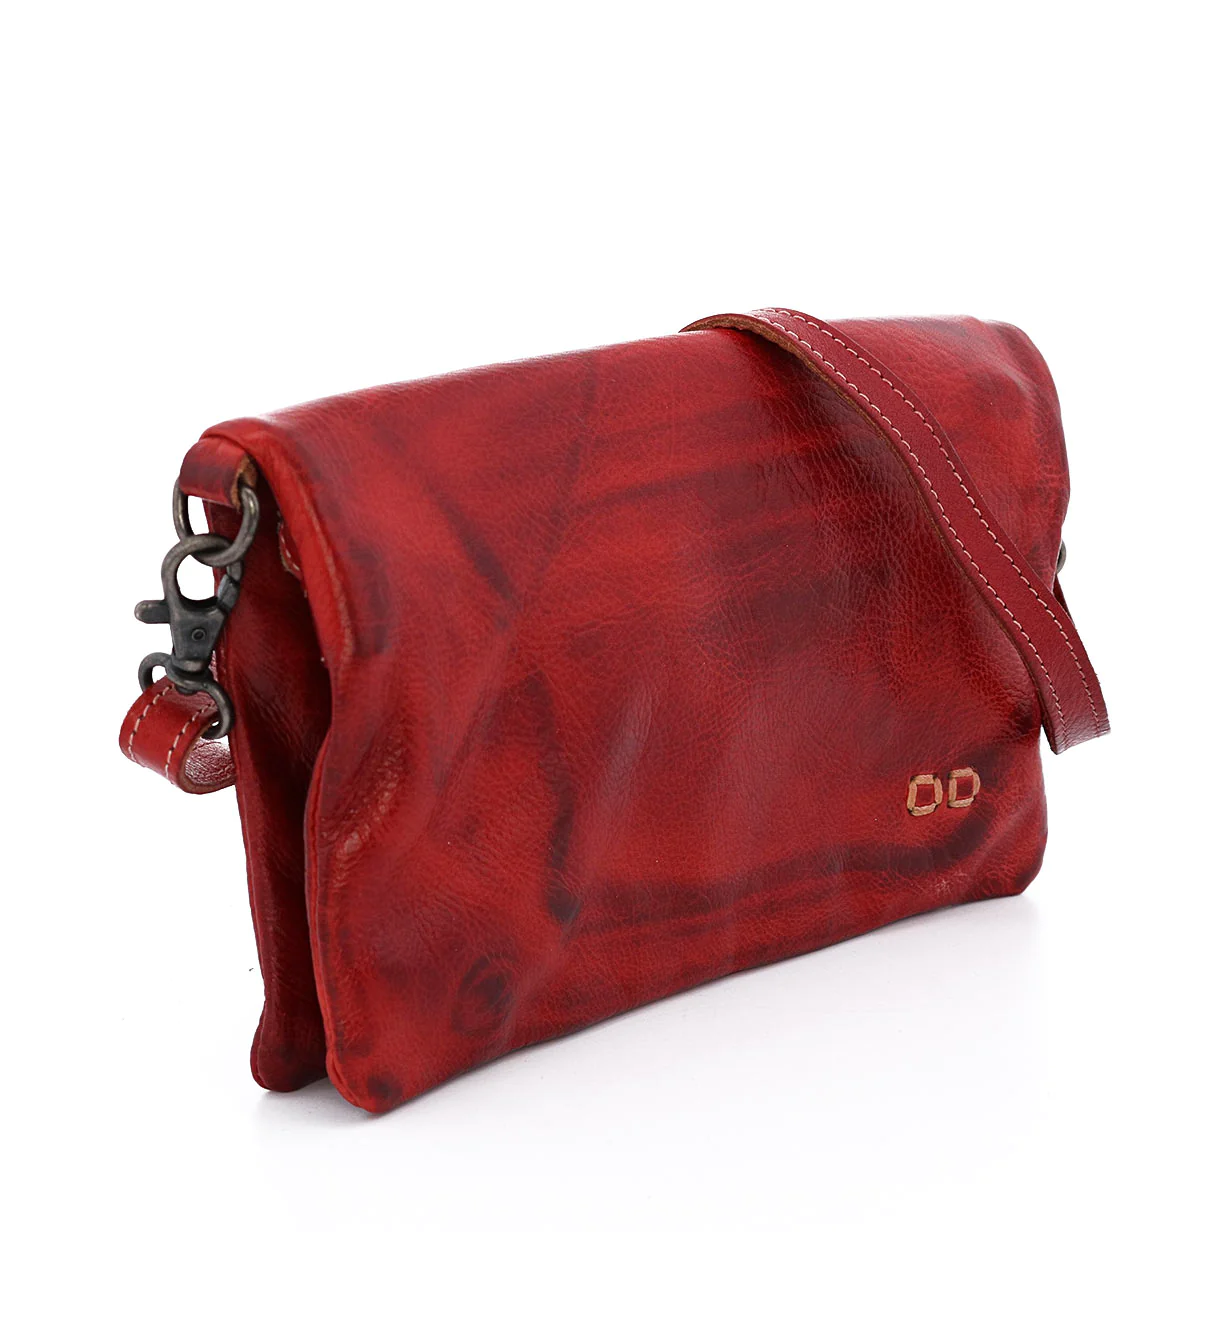 Bed Stu Cadence Hobo Wallet in Red Rustic - SpiritedBoutiques Boho Hippie Boutique Style General, Bed Stu